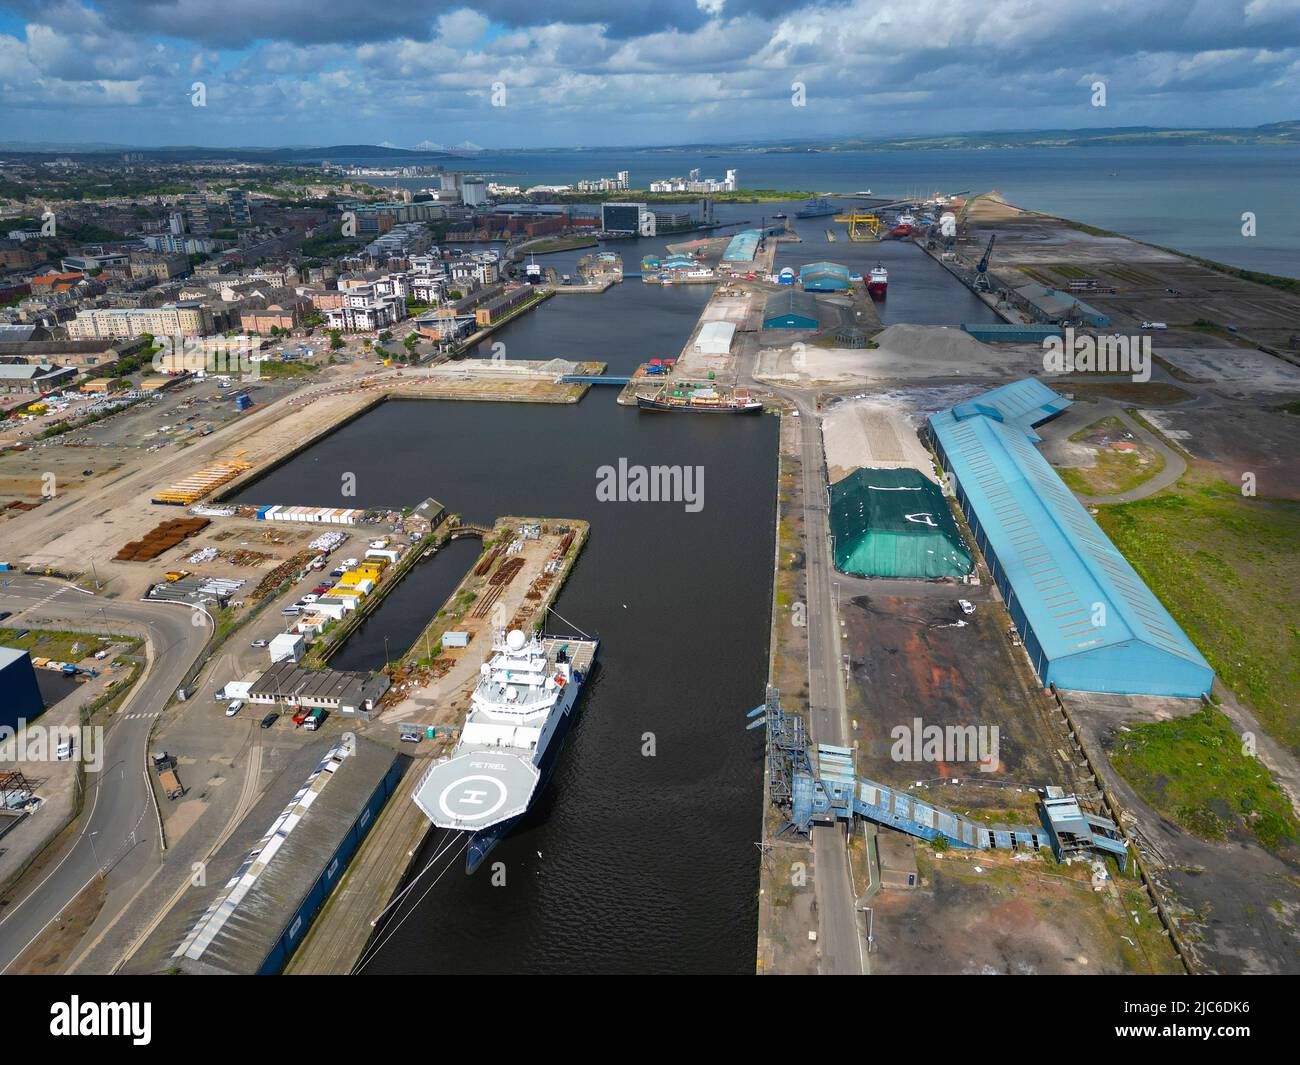 Leith, Scotland, UK. 10 June 2022. Aerial general view of Fort Ports site on the Firth of Forth at Leith. Forth Ports are one of the candidates bidding to become one of Scotland’s first two green Freeports. The successful Freeports are expected to generate billions of pounds of investment and create thousands of jobs.  Iain Masterton/Alamy Live News Stock Photo